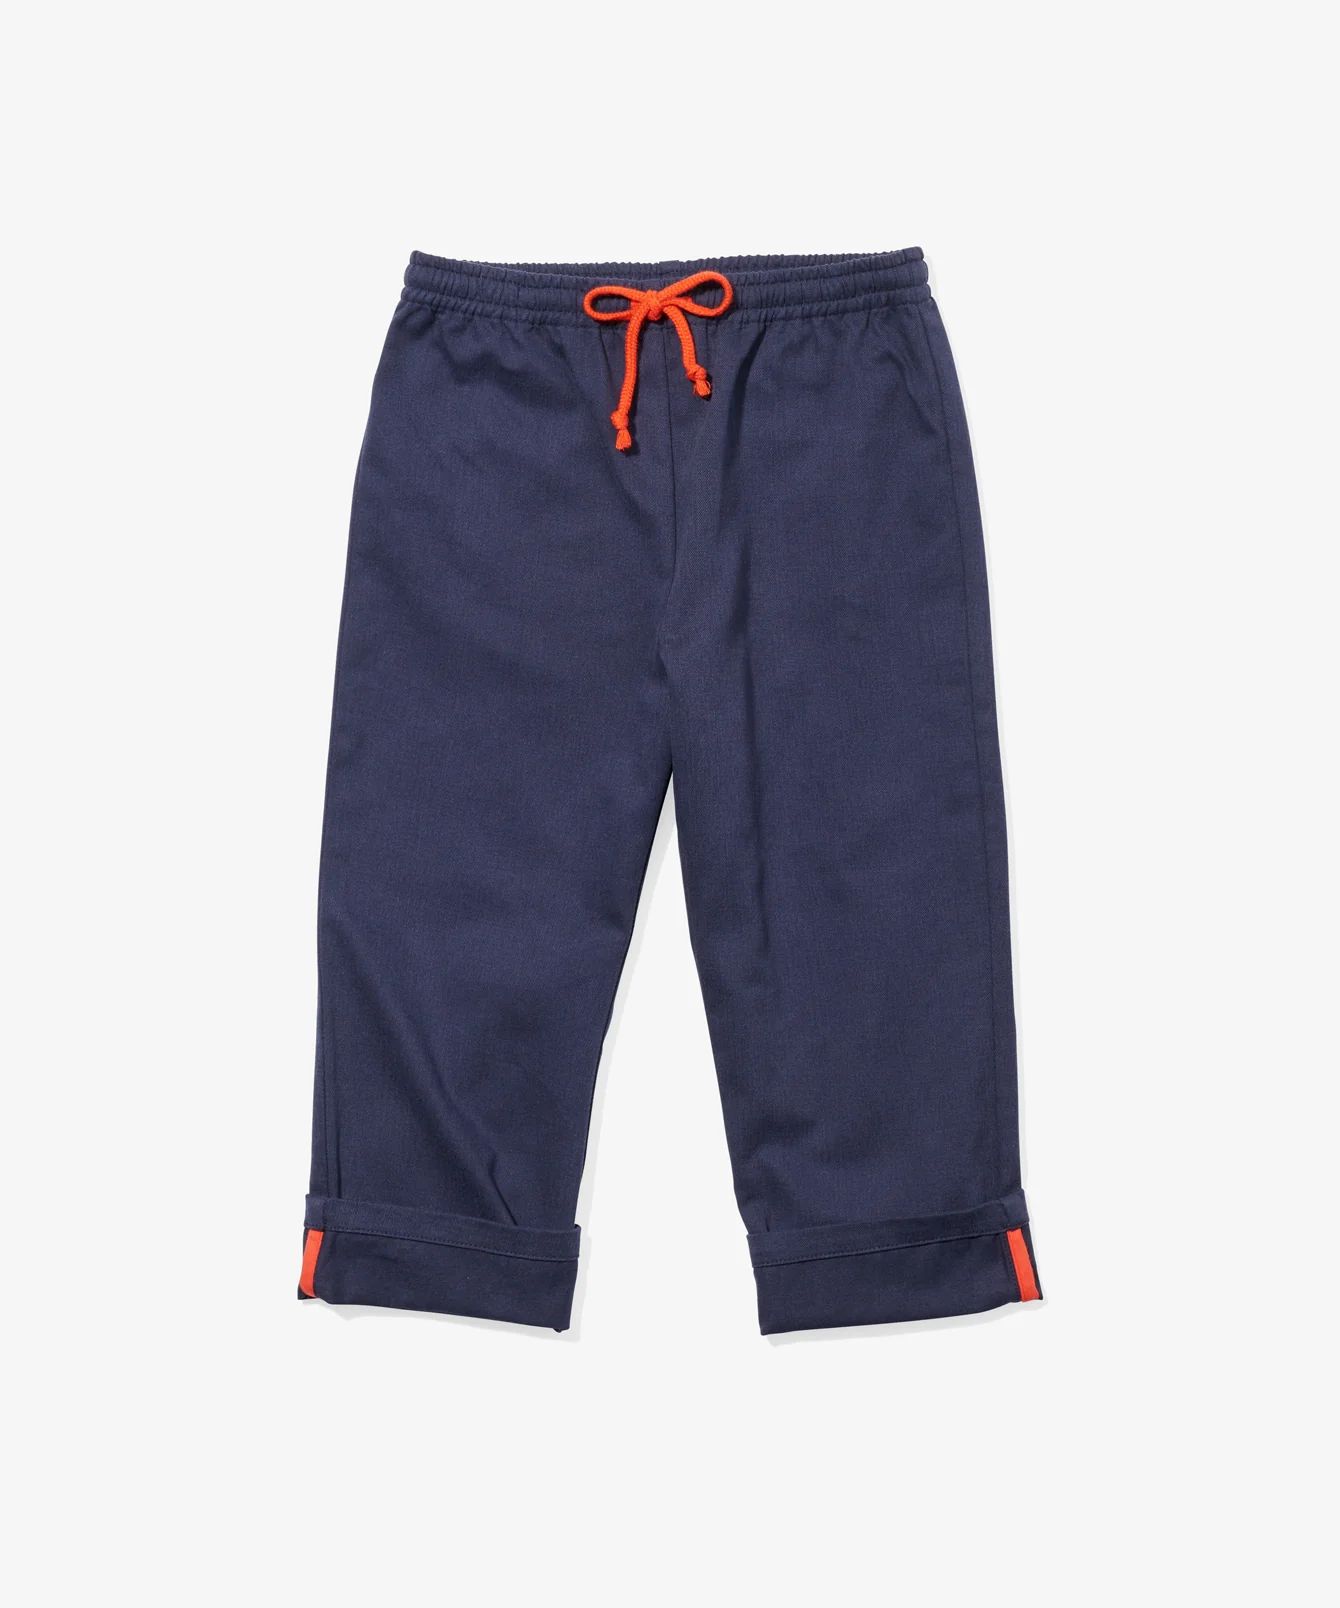 Navy Kid's Pant for Growth Spurts | Oso & Me | Oso & Me